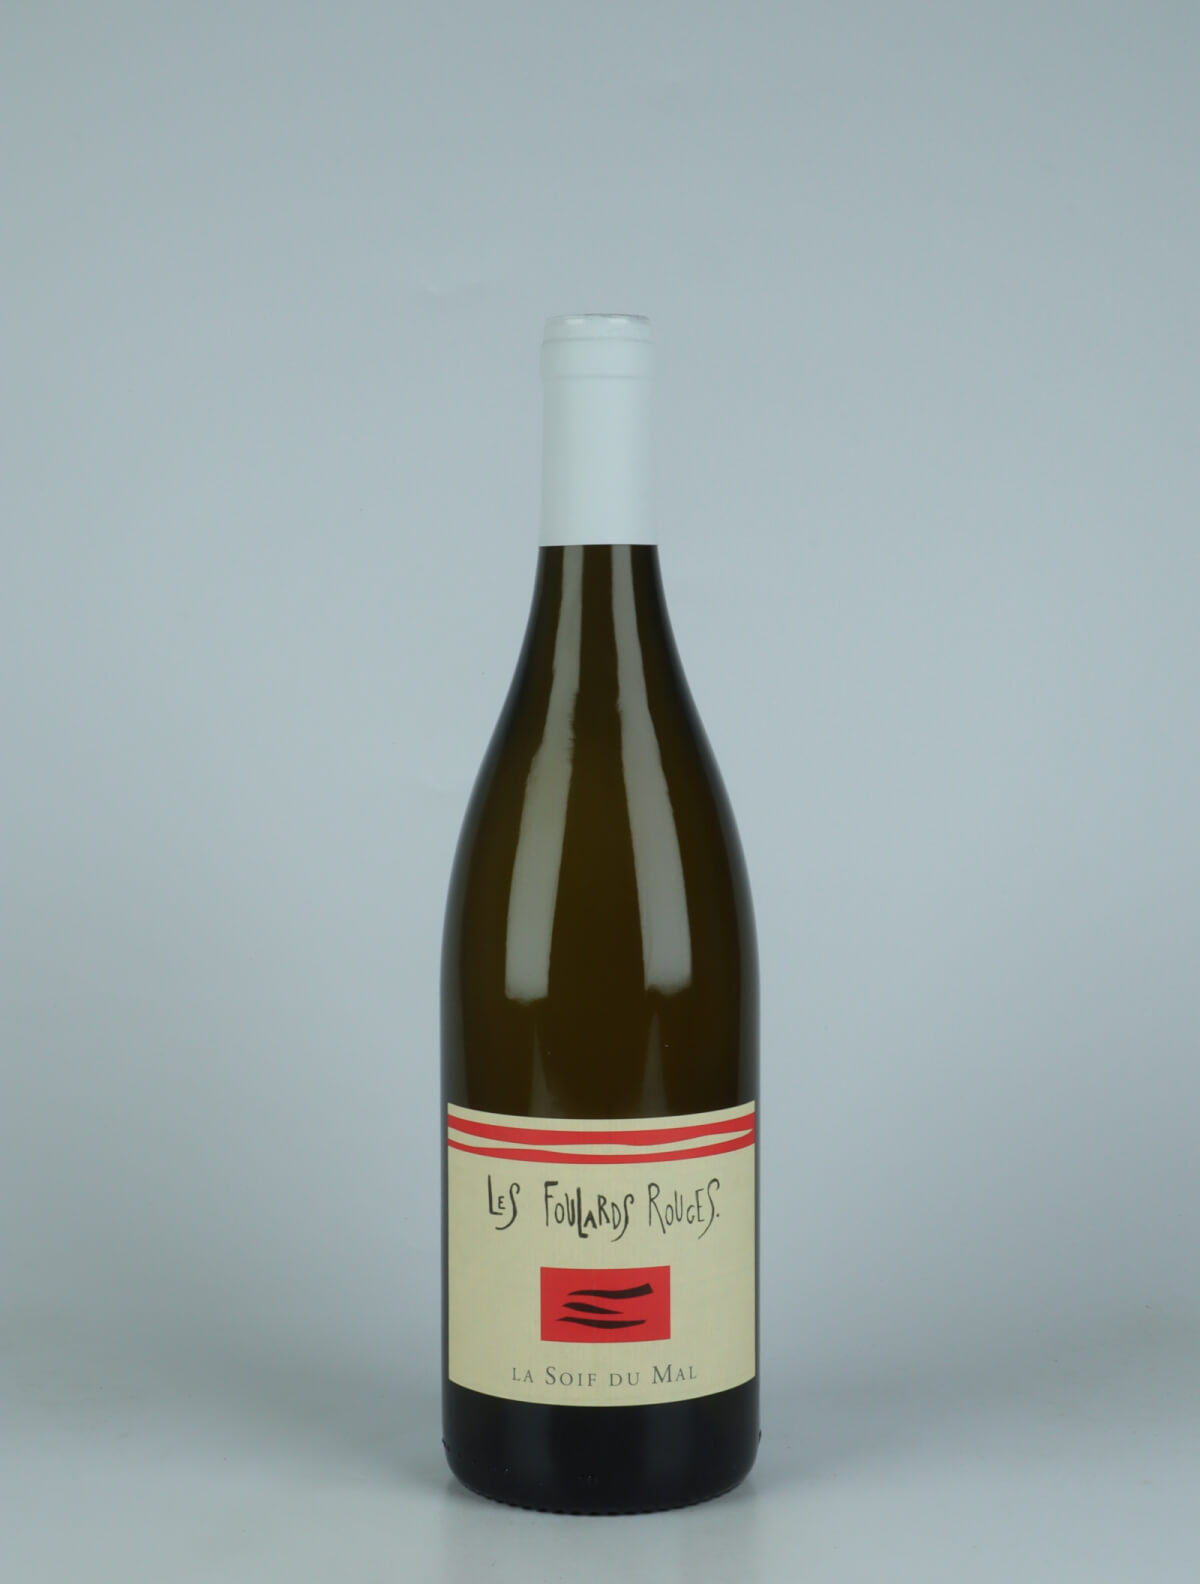 A bottle 2023 Soif du Mal Blanc White wine from Les Foulards Rouges, Languedoc in France